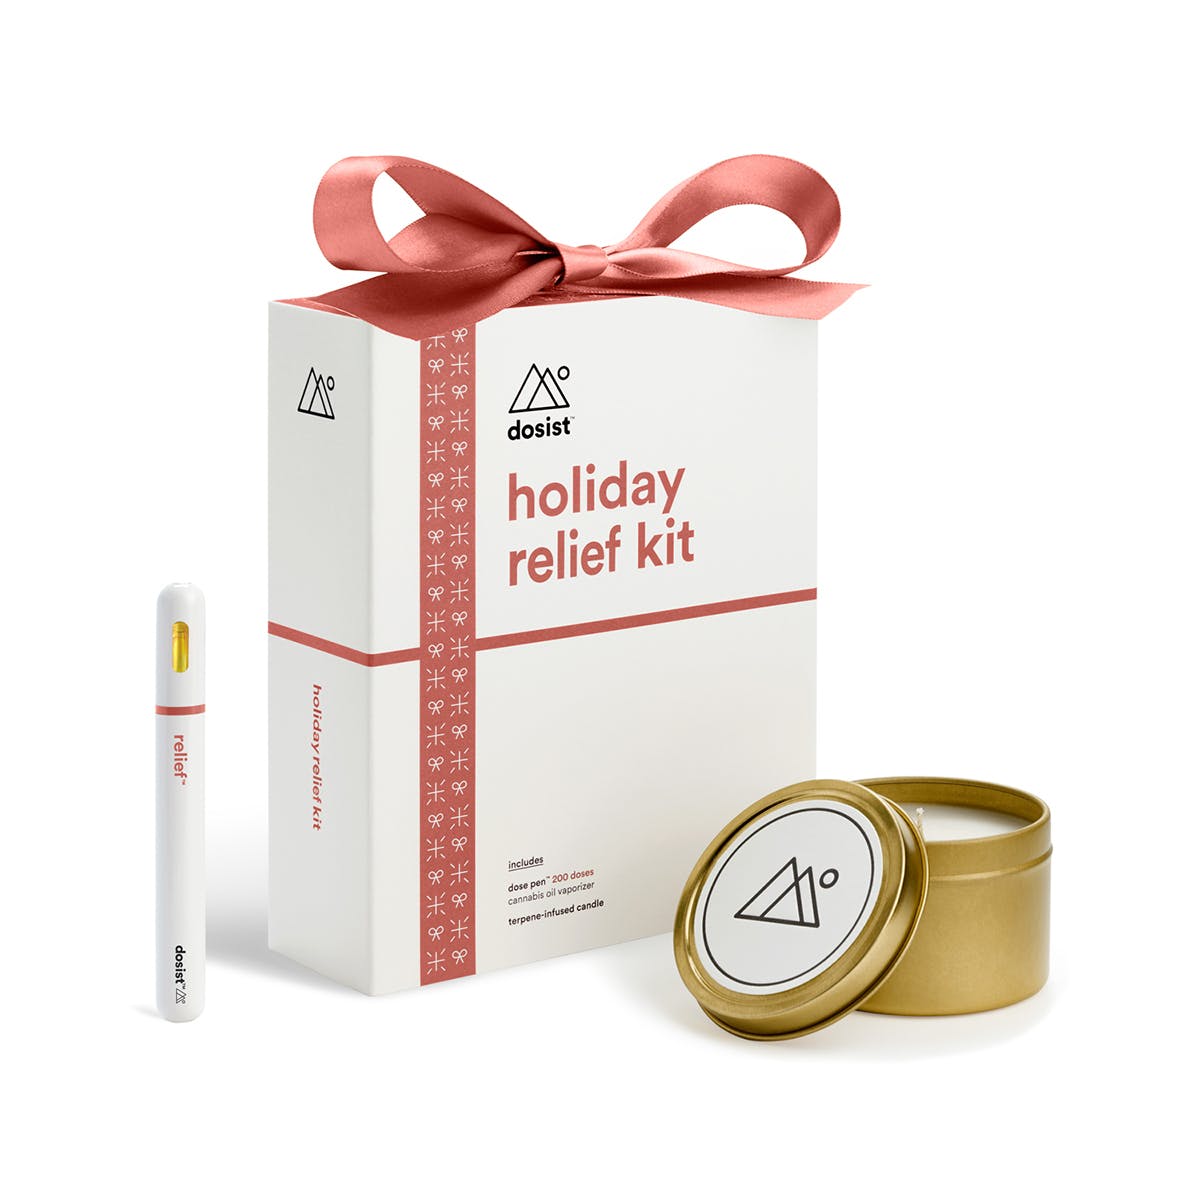 Holiday relief kit by dosist™